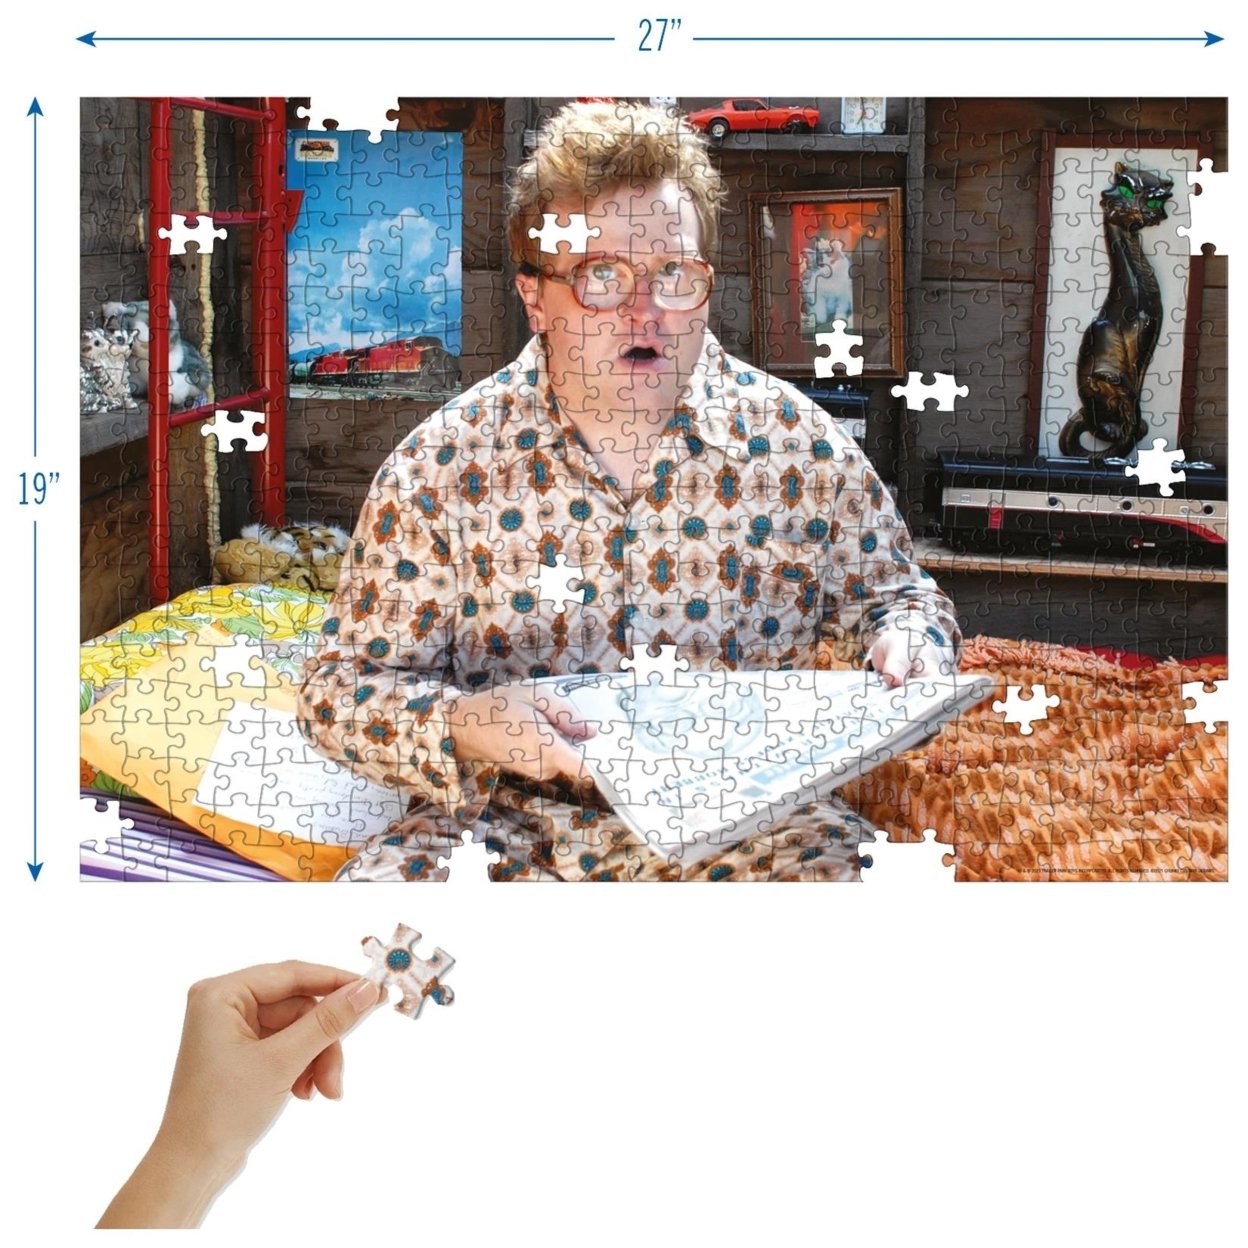 Trailer Park Boys Bubbles Shed Life 420pc Jigsaw Chunky Puzzle TV Series Character Mighty Mojo